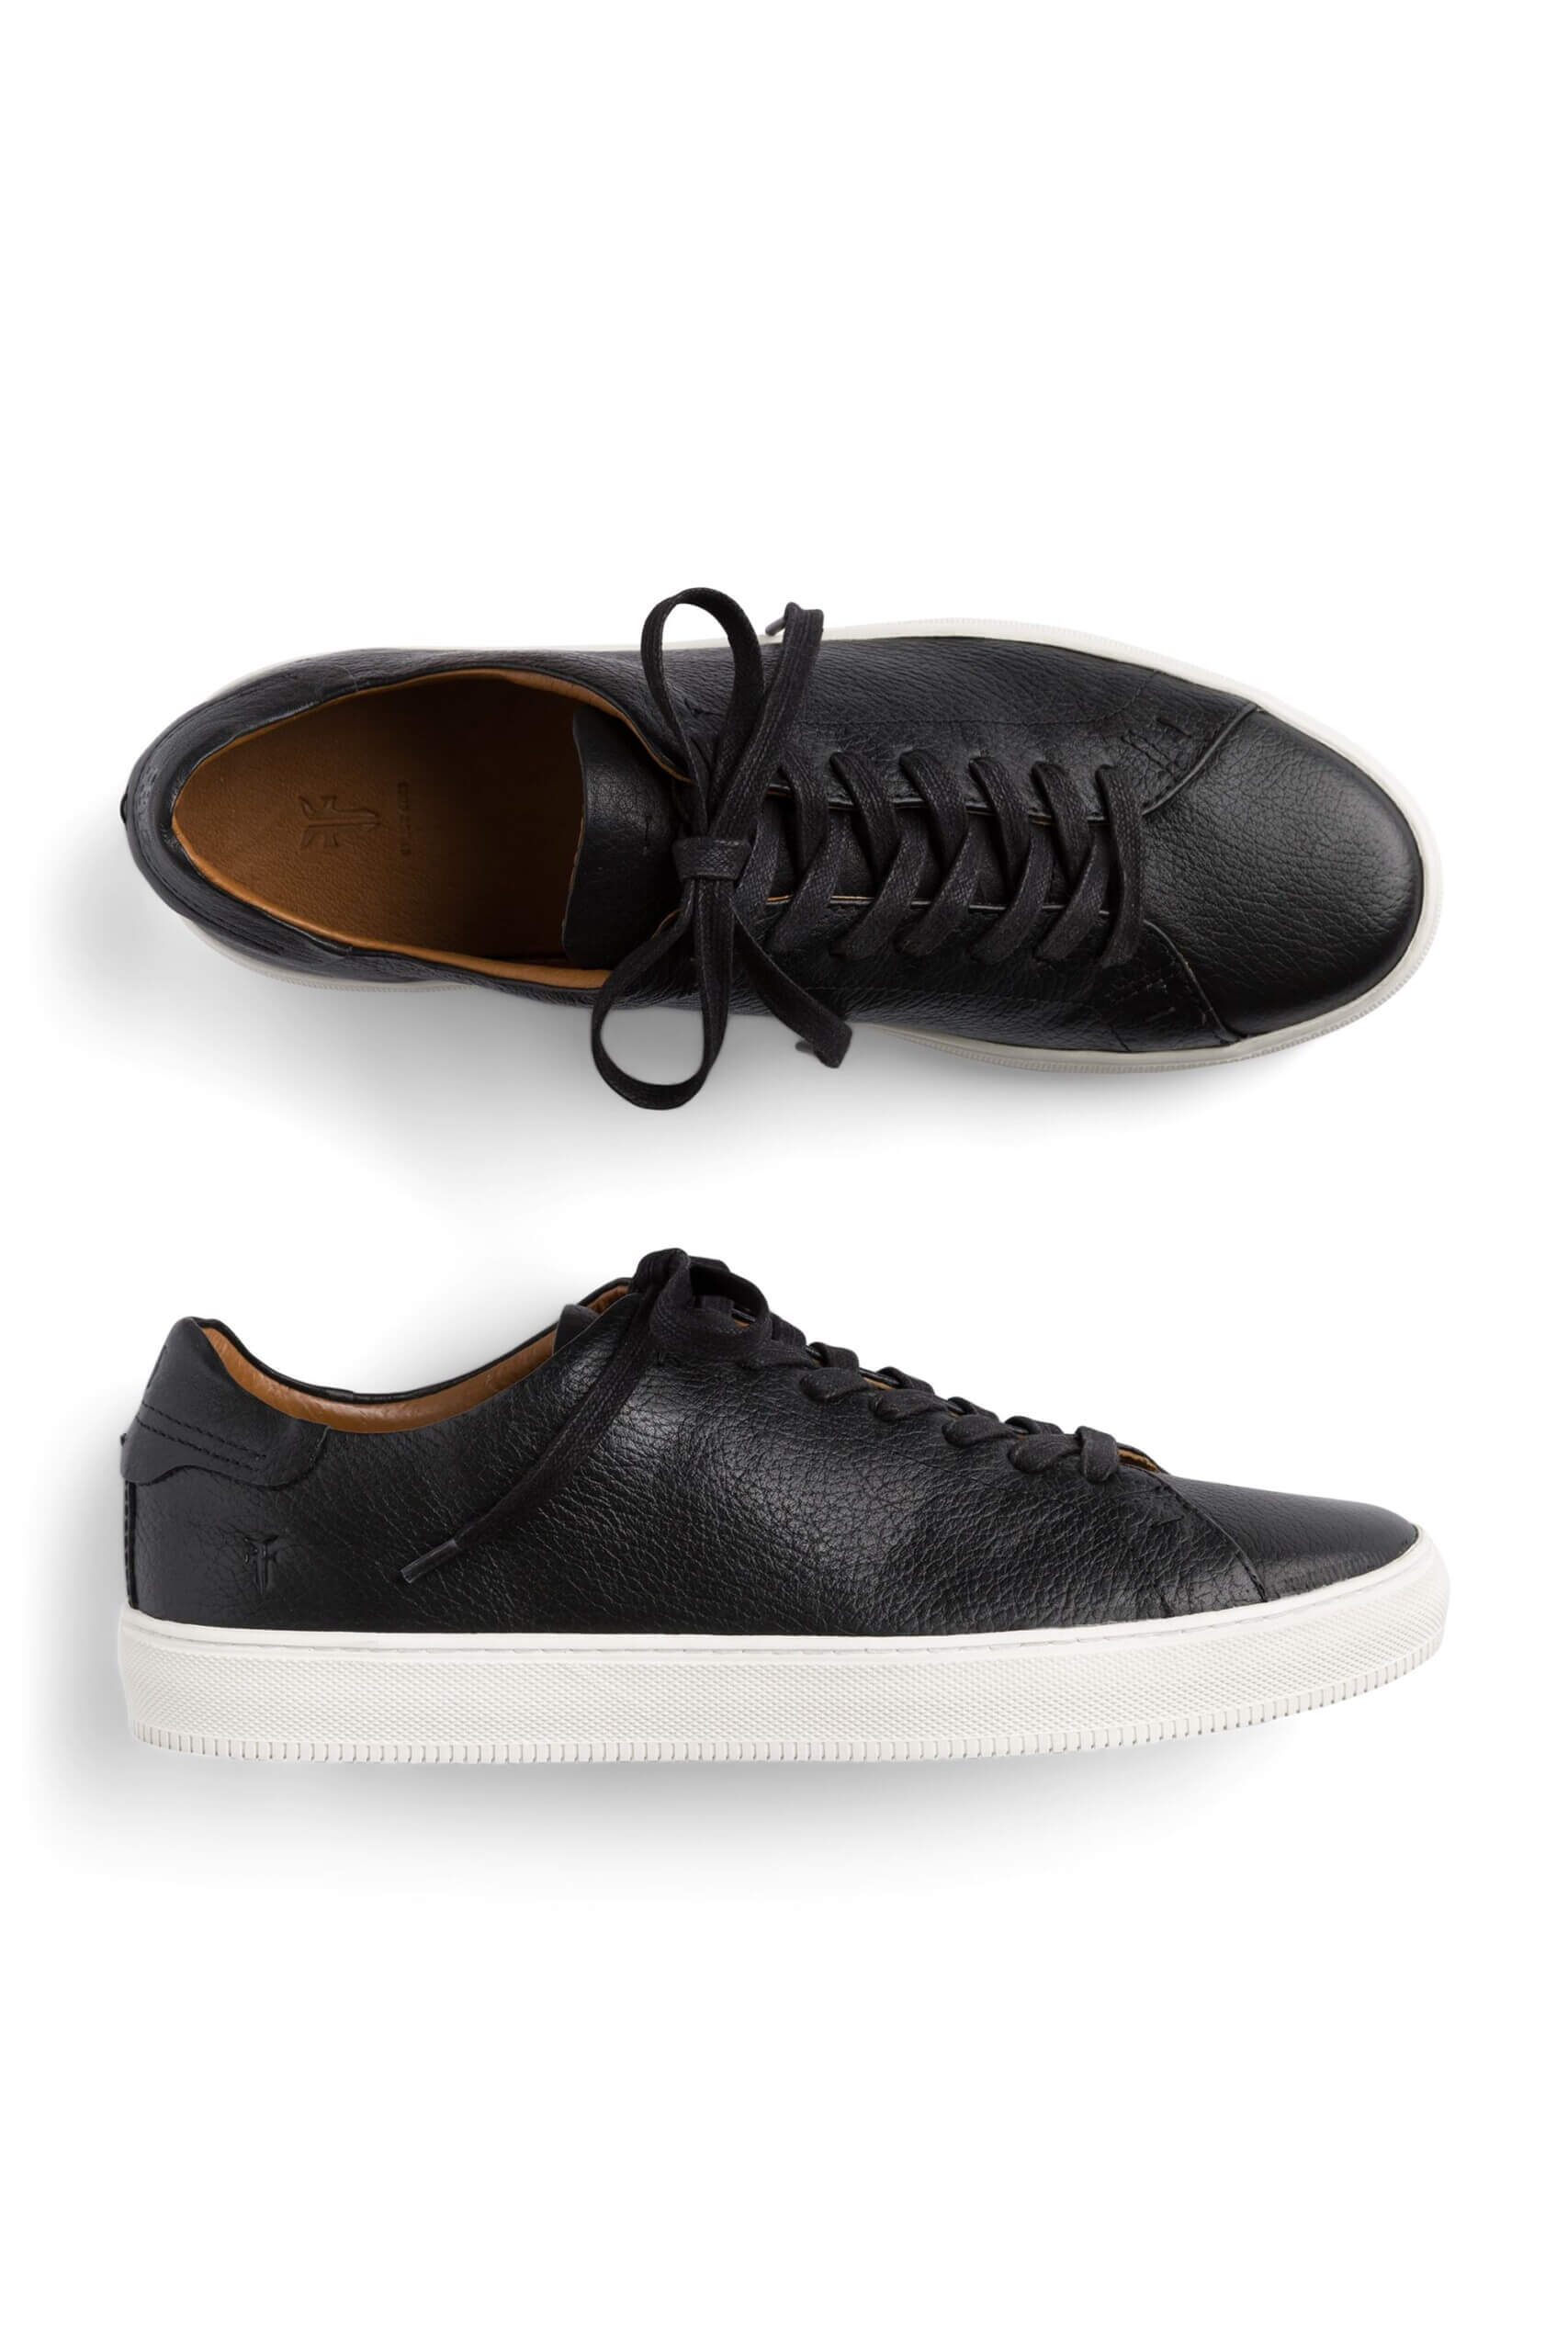 How To Wear Sneakers | Men's Complete Guide | Stitch Fix